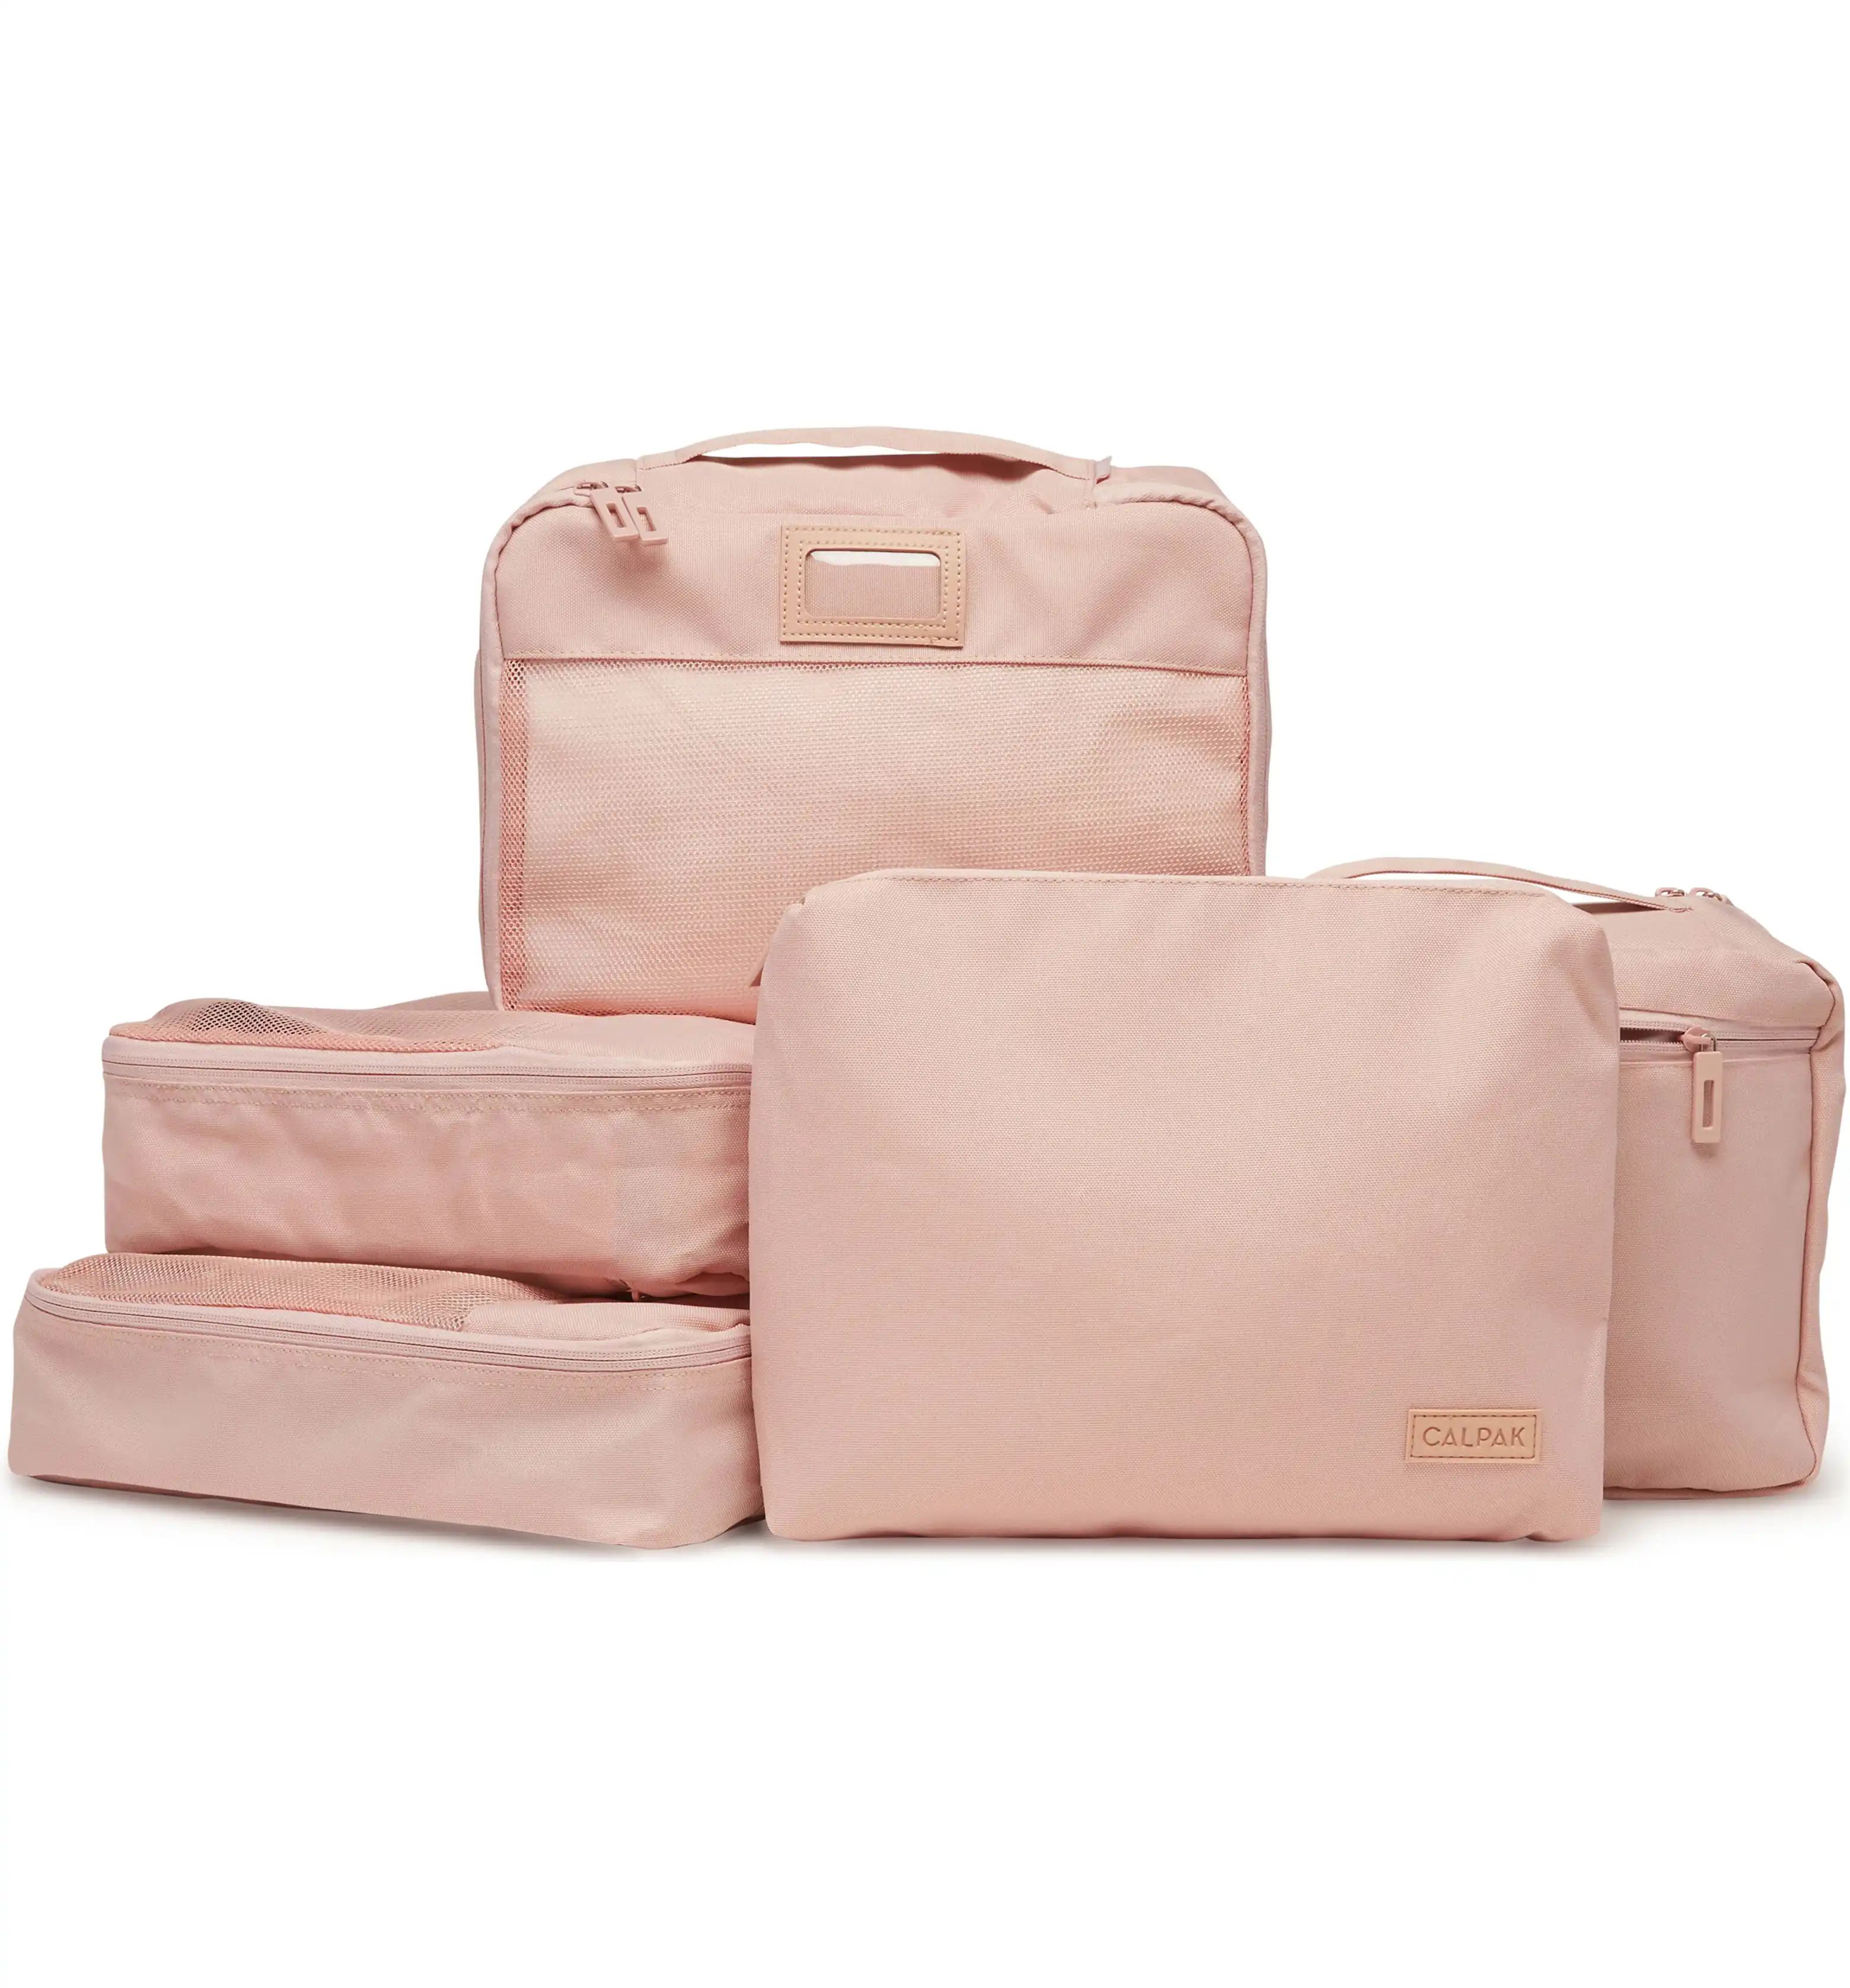 5-Piece Packing Cube Set | Nordstrom